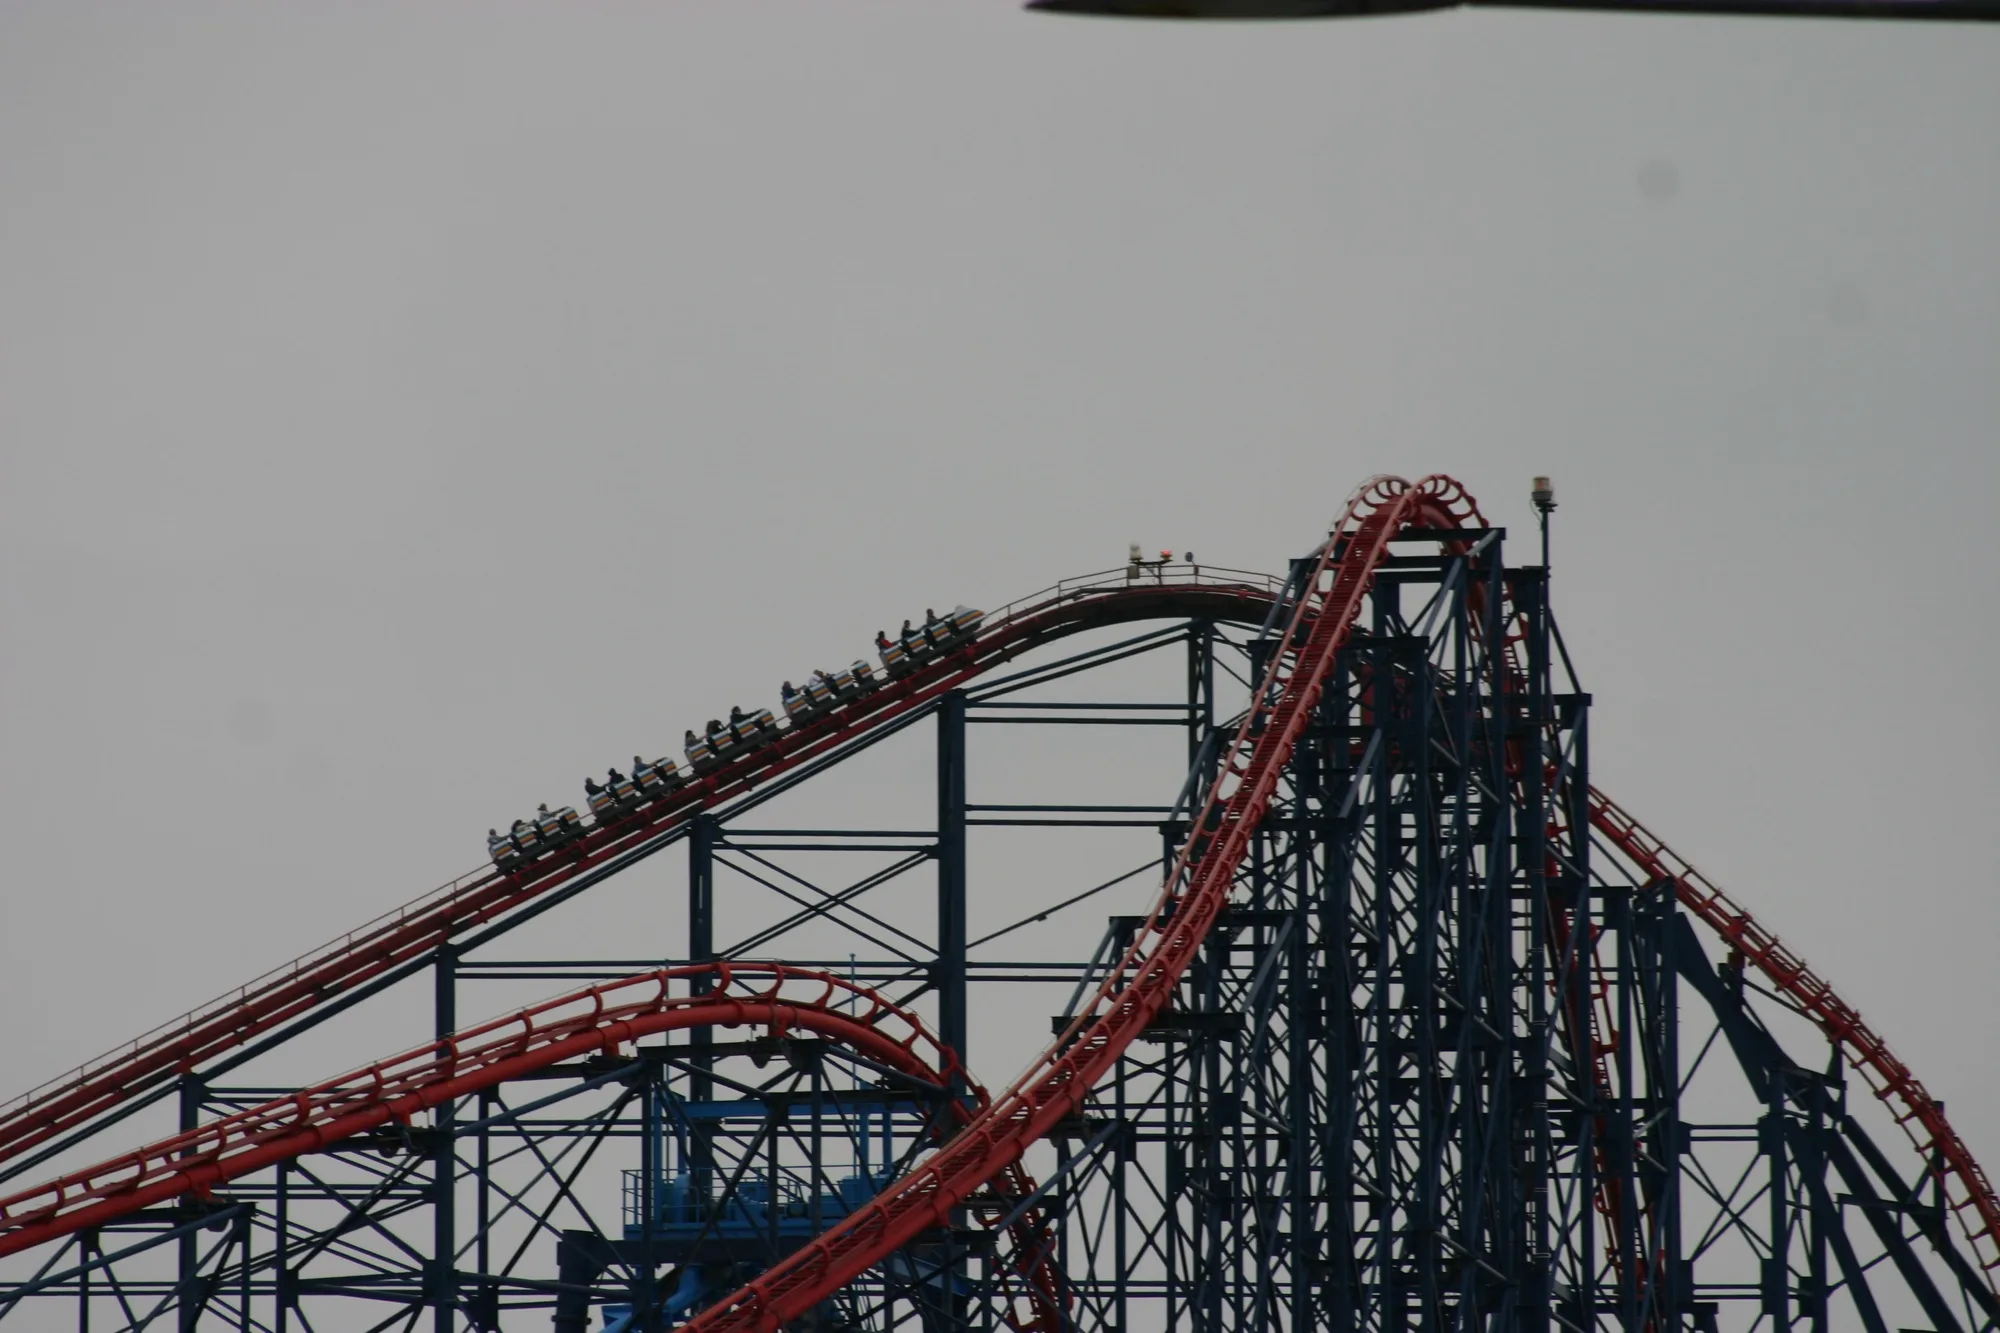 A photo of The Big One, a rollercoaster at Blackpool Pleasure Beach